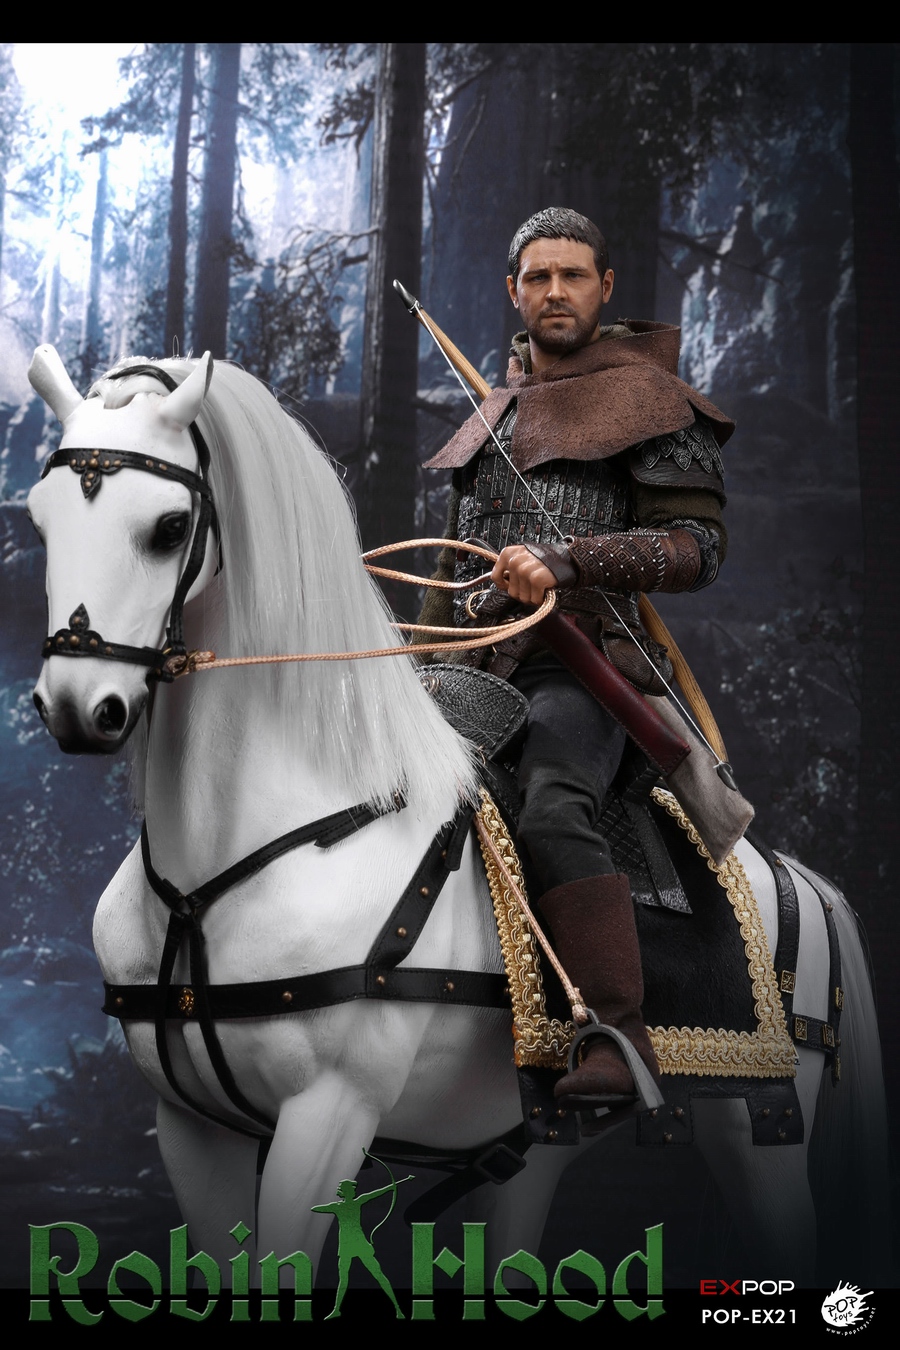 poptoys - NEW PRODUCT: POPTOYS: 1/6 EX21 Robin Hood Chivalrous Robin Hood - Double Head Carving & War Horse 22410110